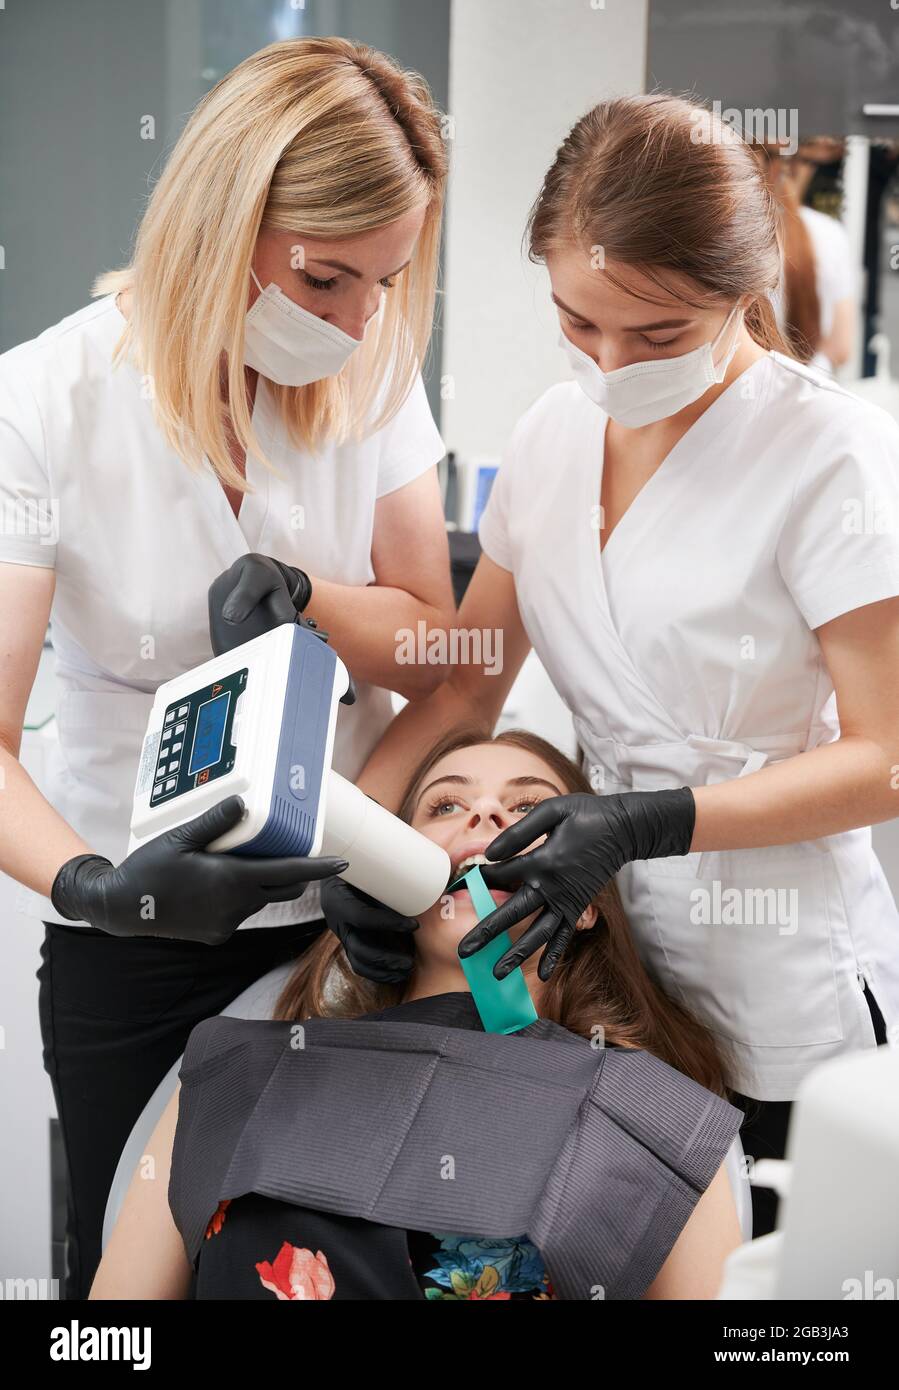 Doctors using portable dental x-ray machine while examining patient teeth in dental office, performing intraoral scanning with modern equipment. Concept of digital dentistry and intraoral radiography. Stock Photo